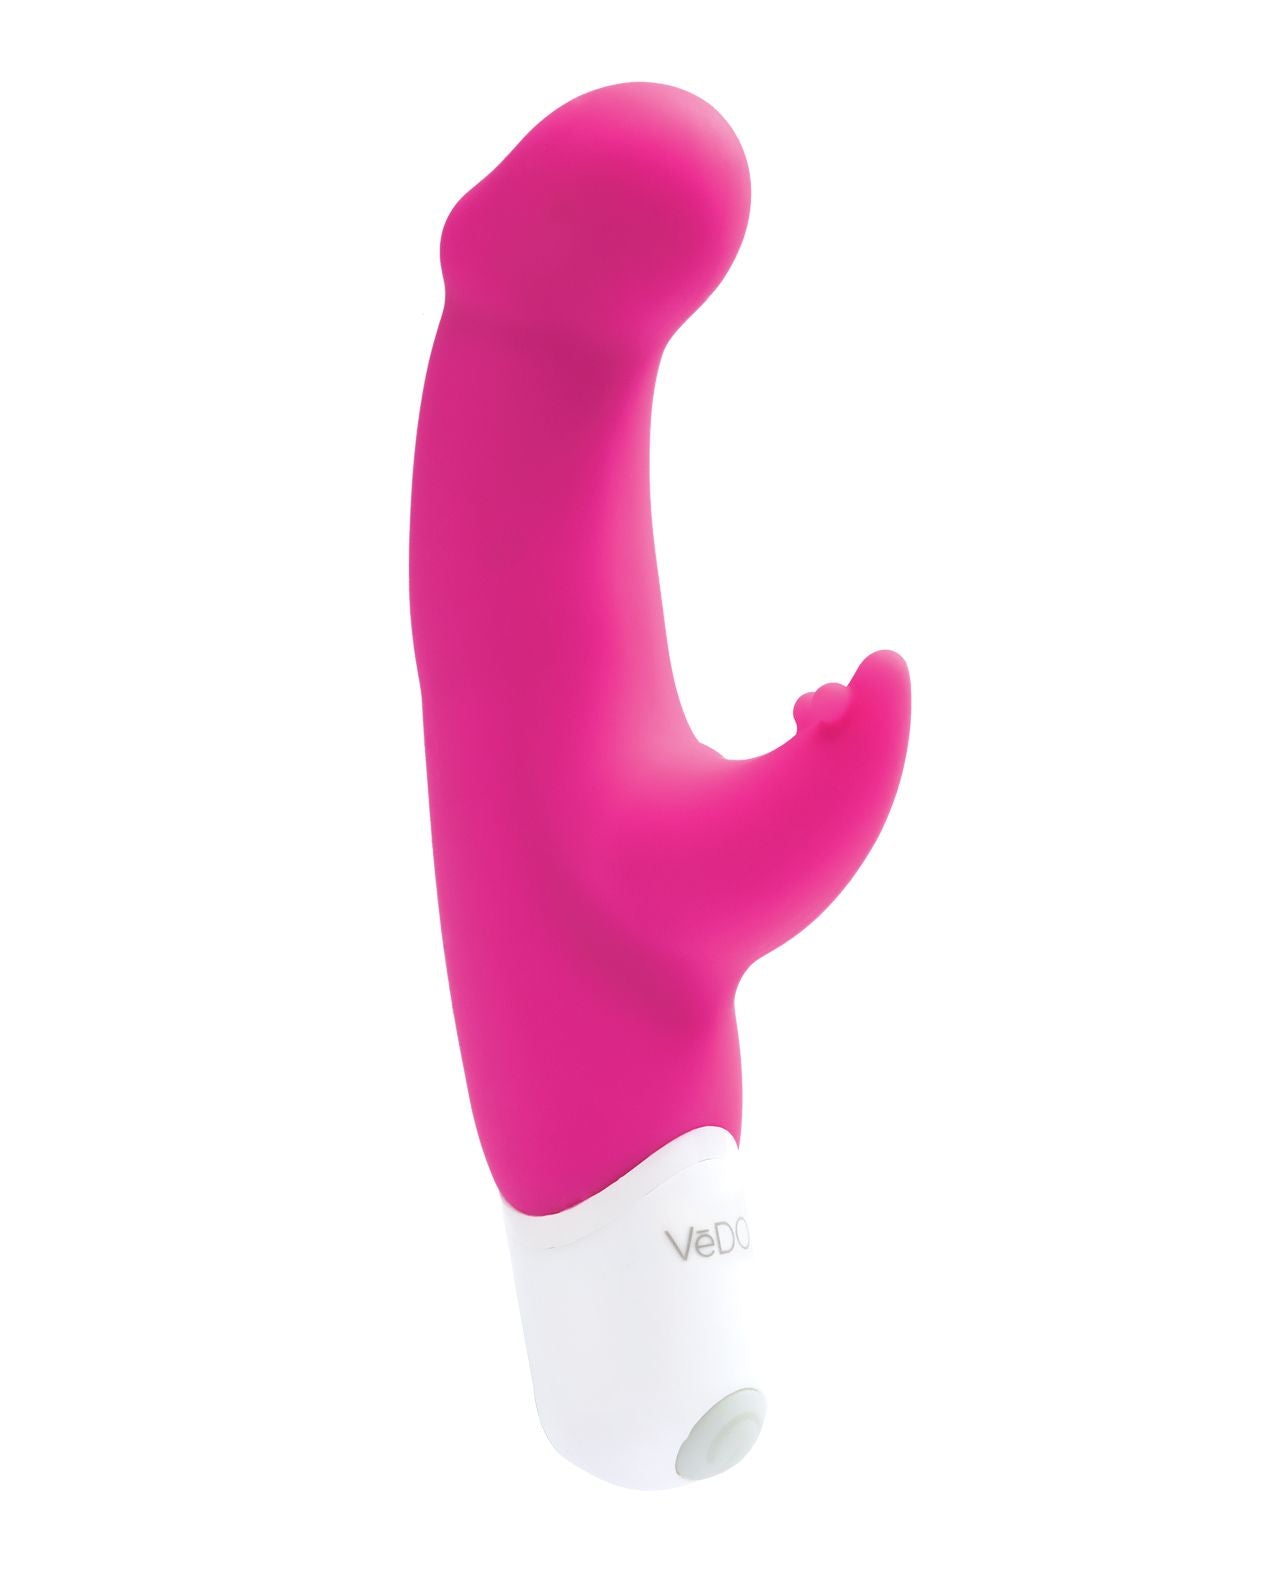 Joy vibe, side view showing its clitoral tickler and bulbous G-spot head (hot pink).